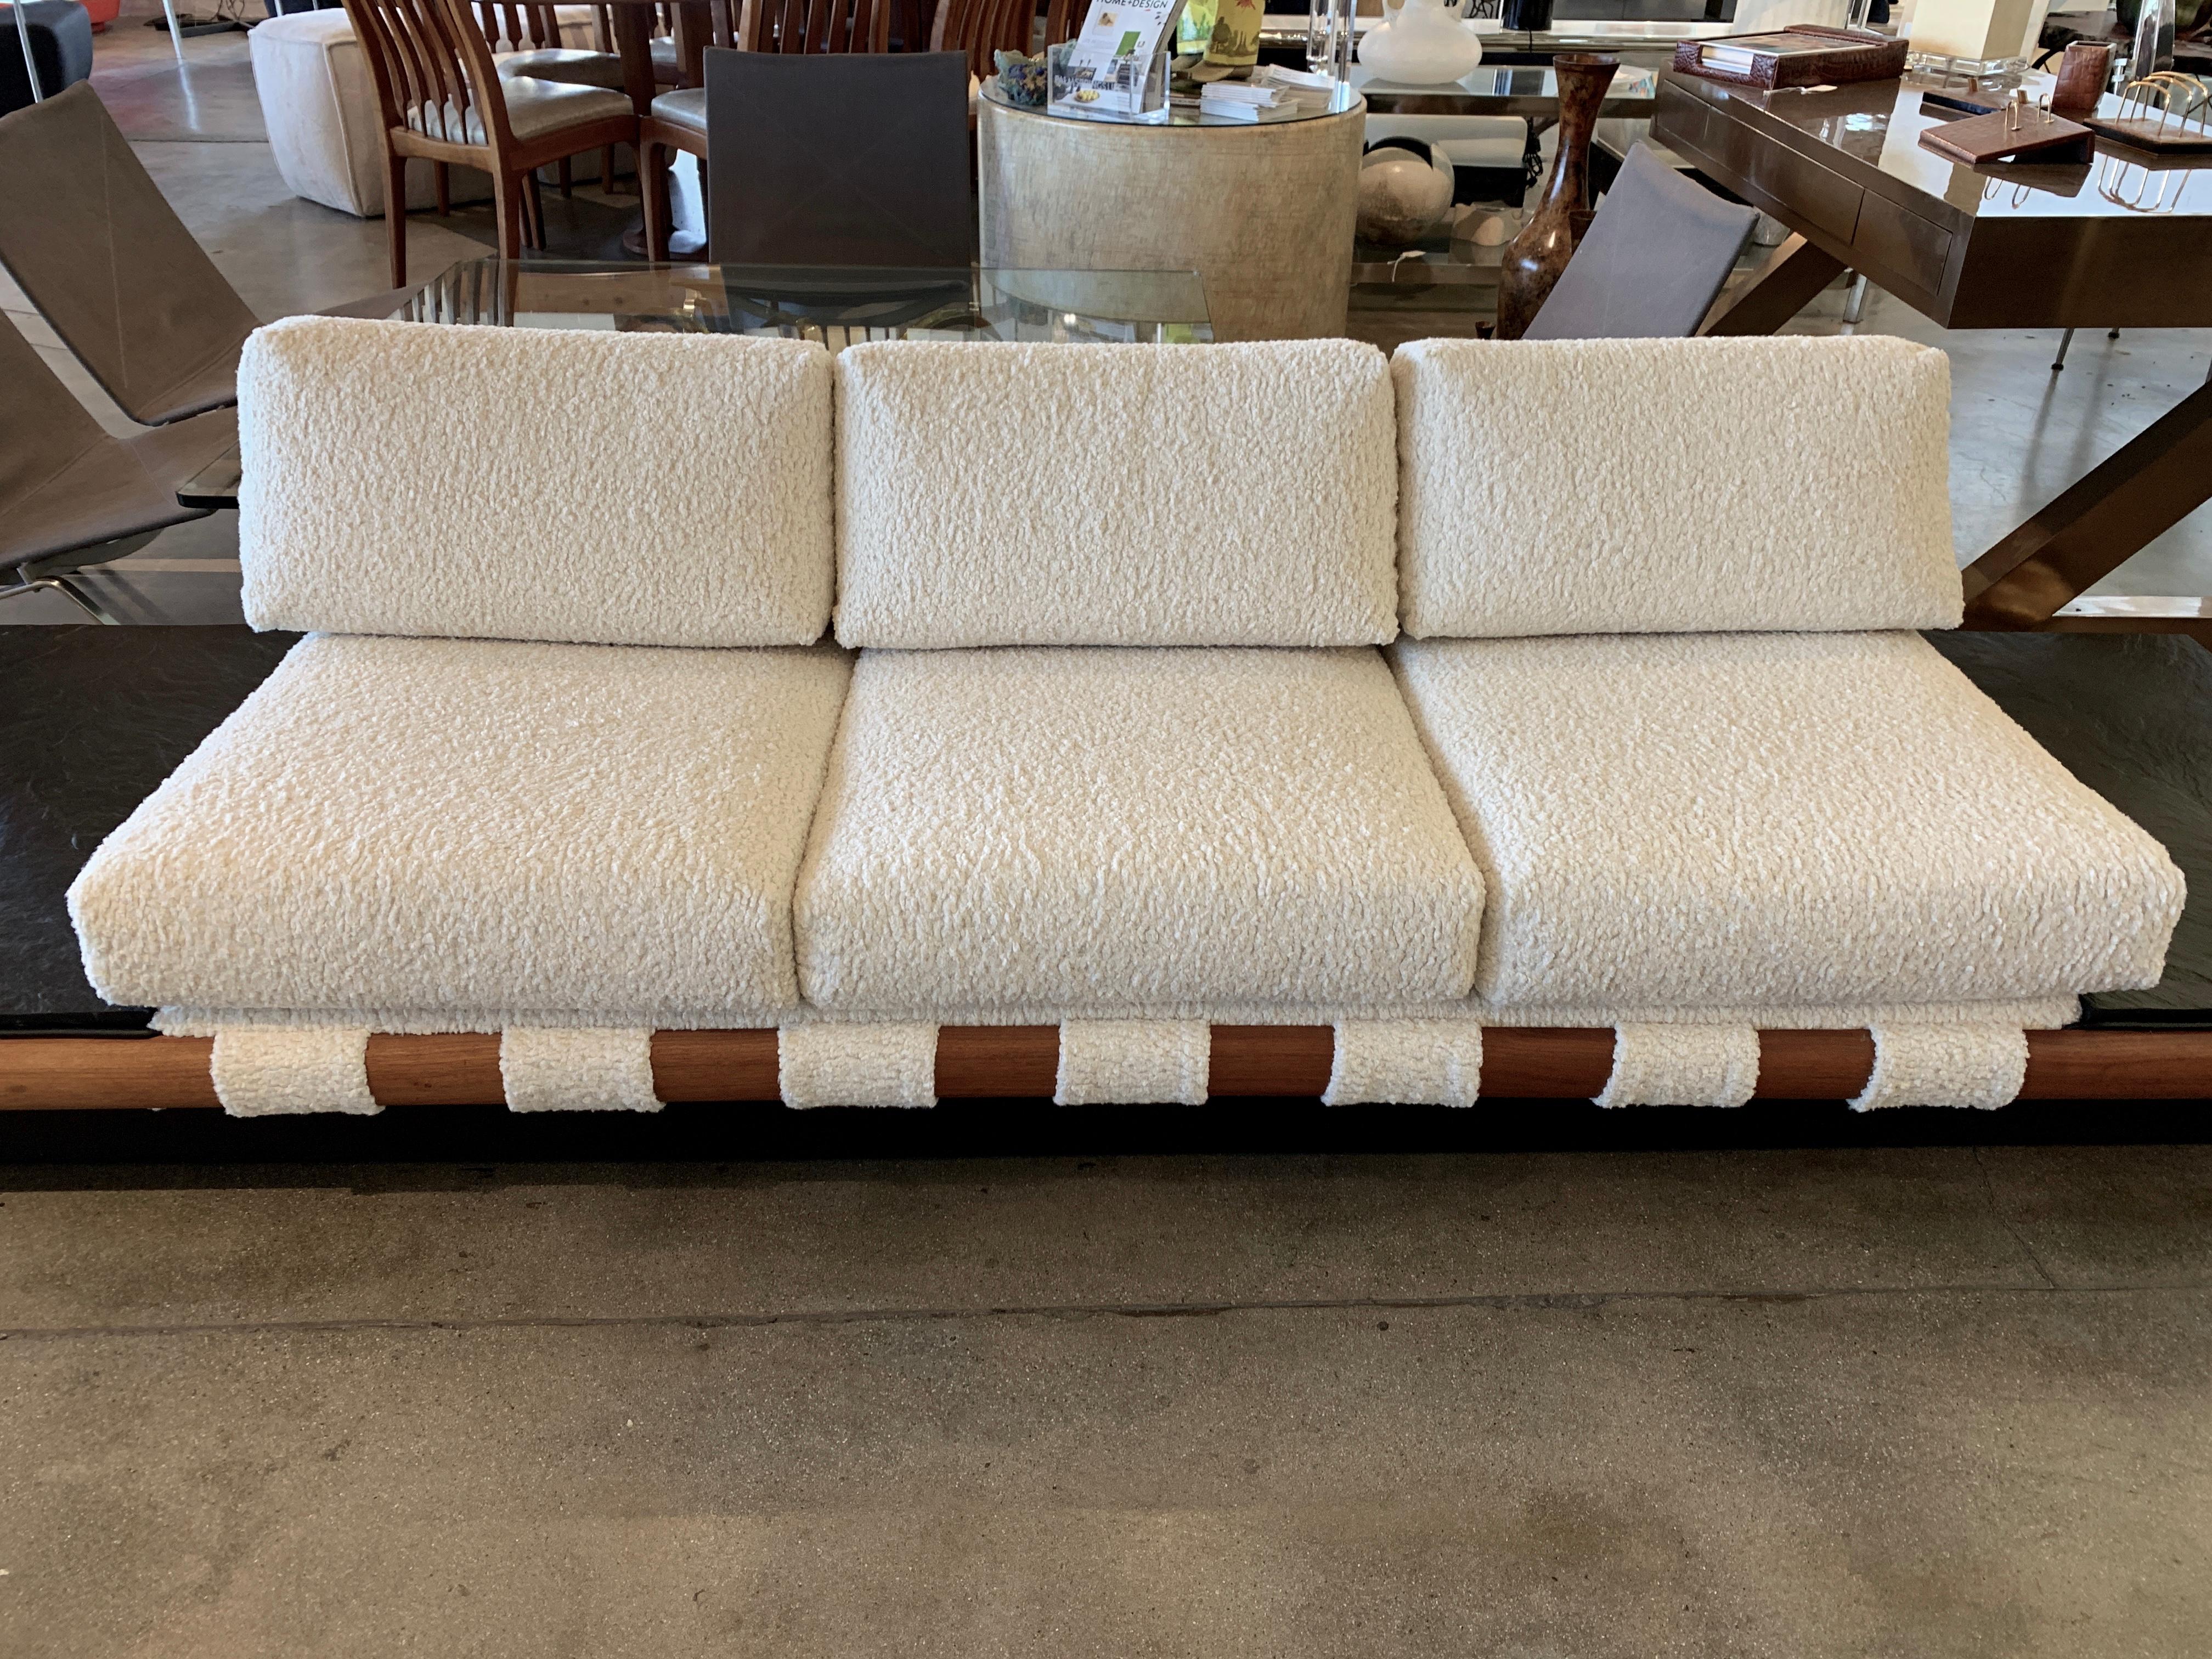 A vintage 1960s Adrian Pearsall platform sofa re-upholstered in a Kravet Faux Shearling fabric. The ends are set in pieces of slate. The black platform base has been repainted and retouched. The wood frame has some imperfections with age appropriate